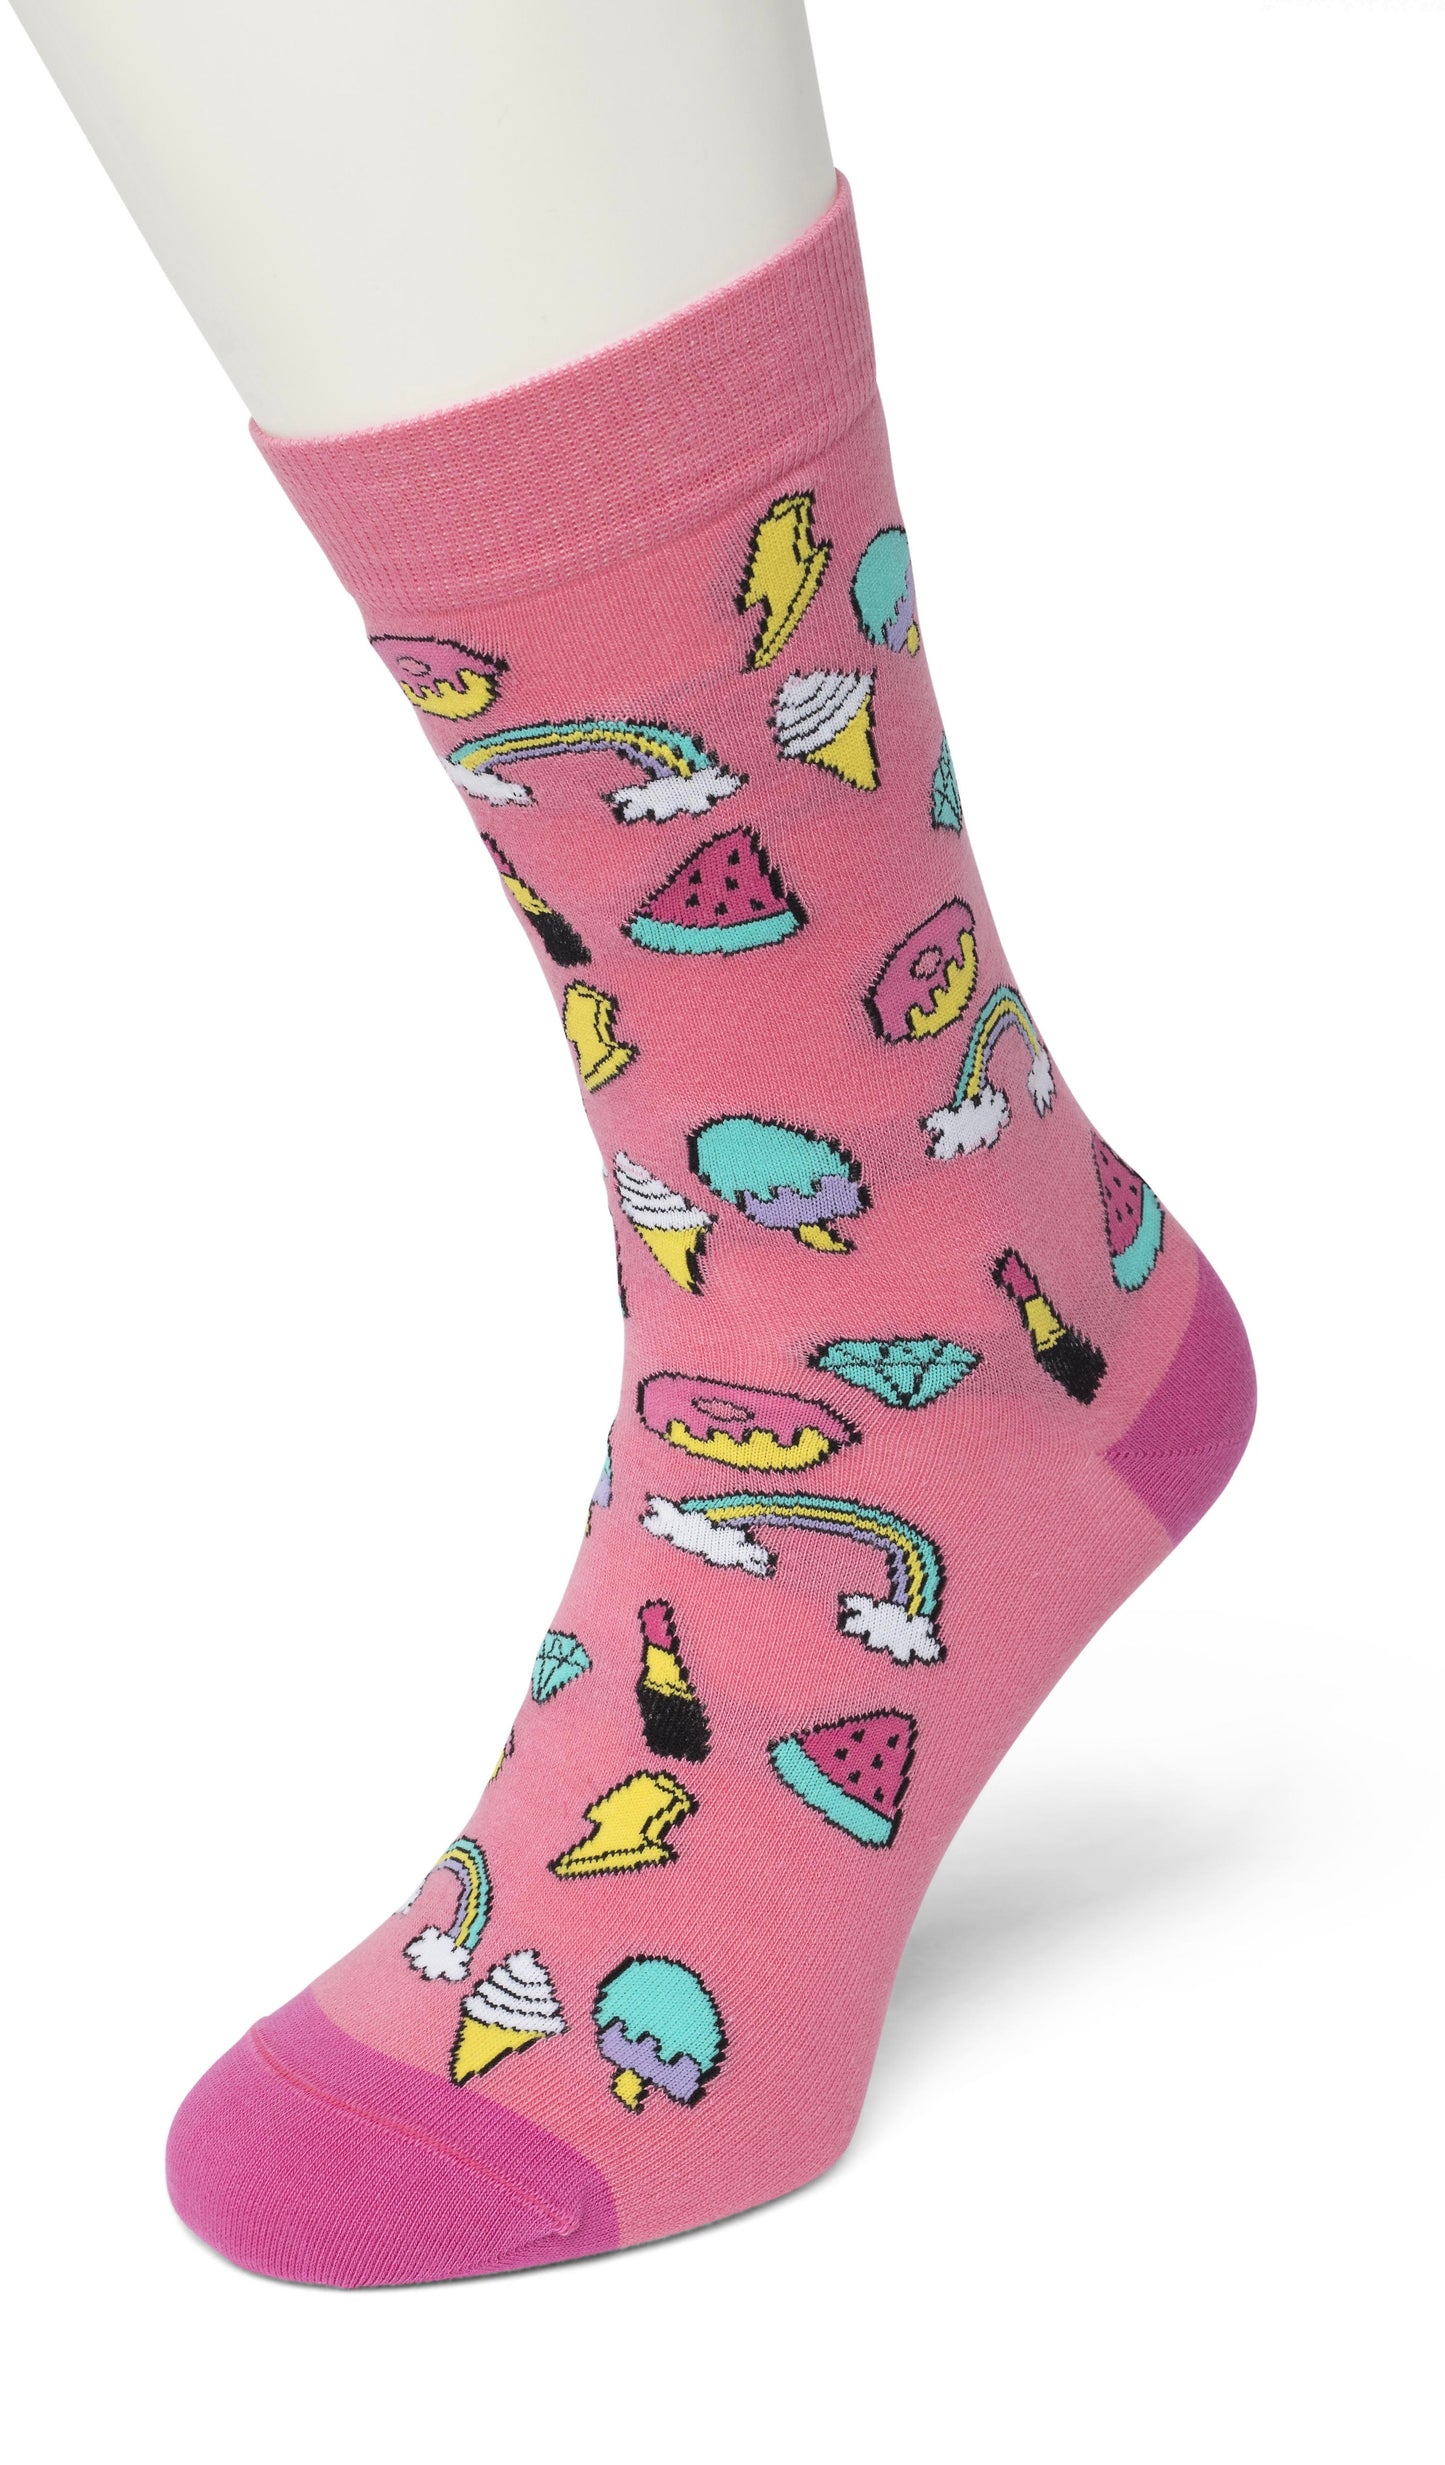 Bonnie Doon Donut Sock - Pink cotton mix colourful fun patterned socks featuring donuts, ice-cream, rainbows, lightning bolts, watermelon, diamonds and lipstick.